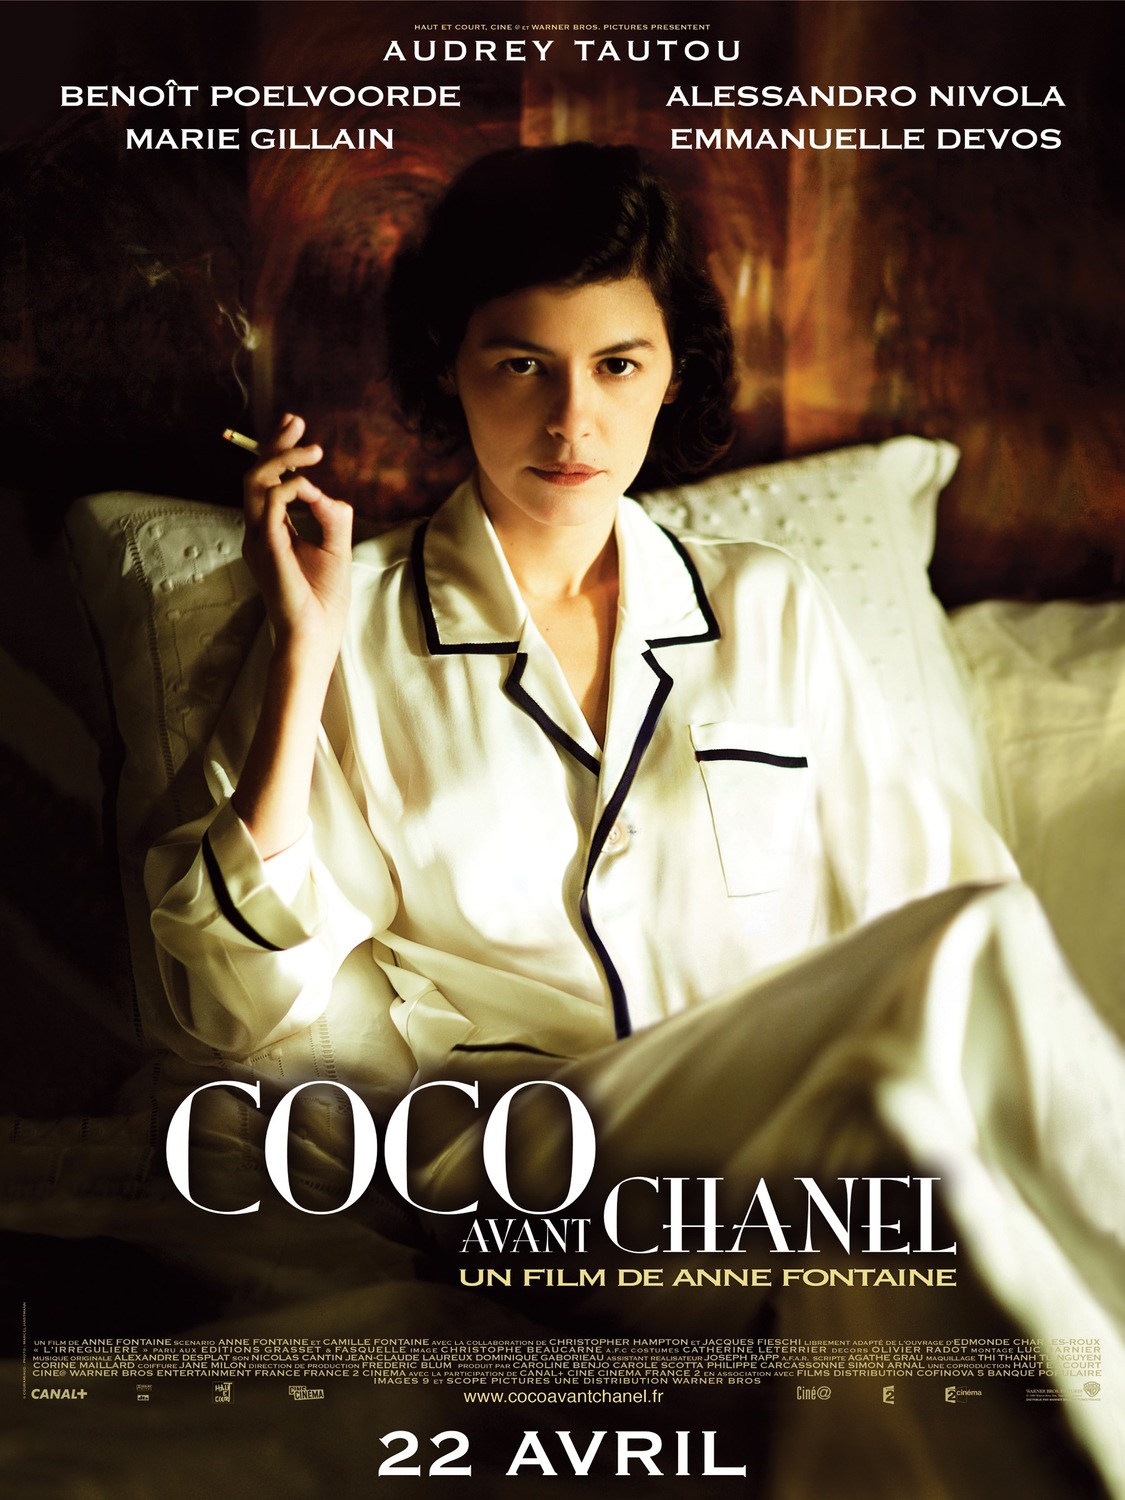 Coco avant Chanel (#1 of 5): Extra Large Movie Poster Image - IMP Awards